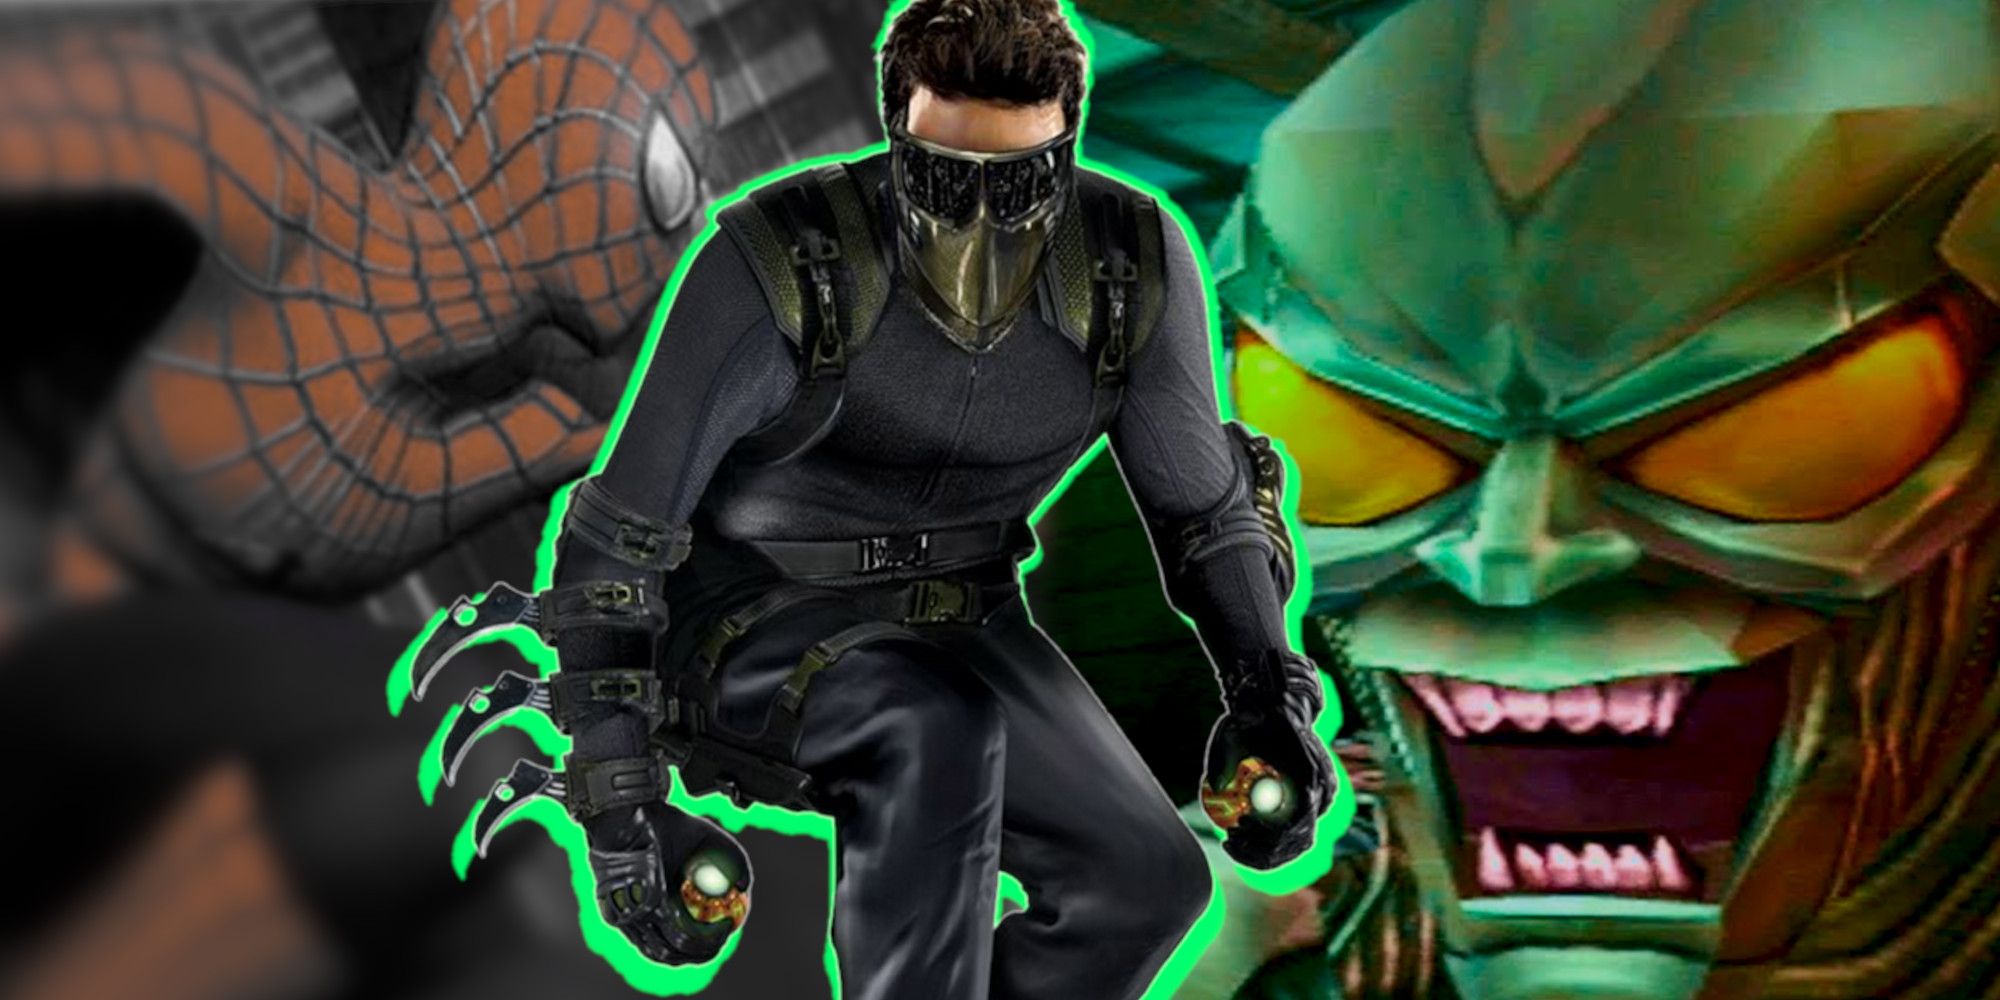 The Spider-Man Tie-In Game Teased the New Goblin Before Spider-Man 3